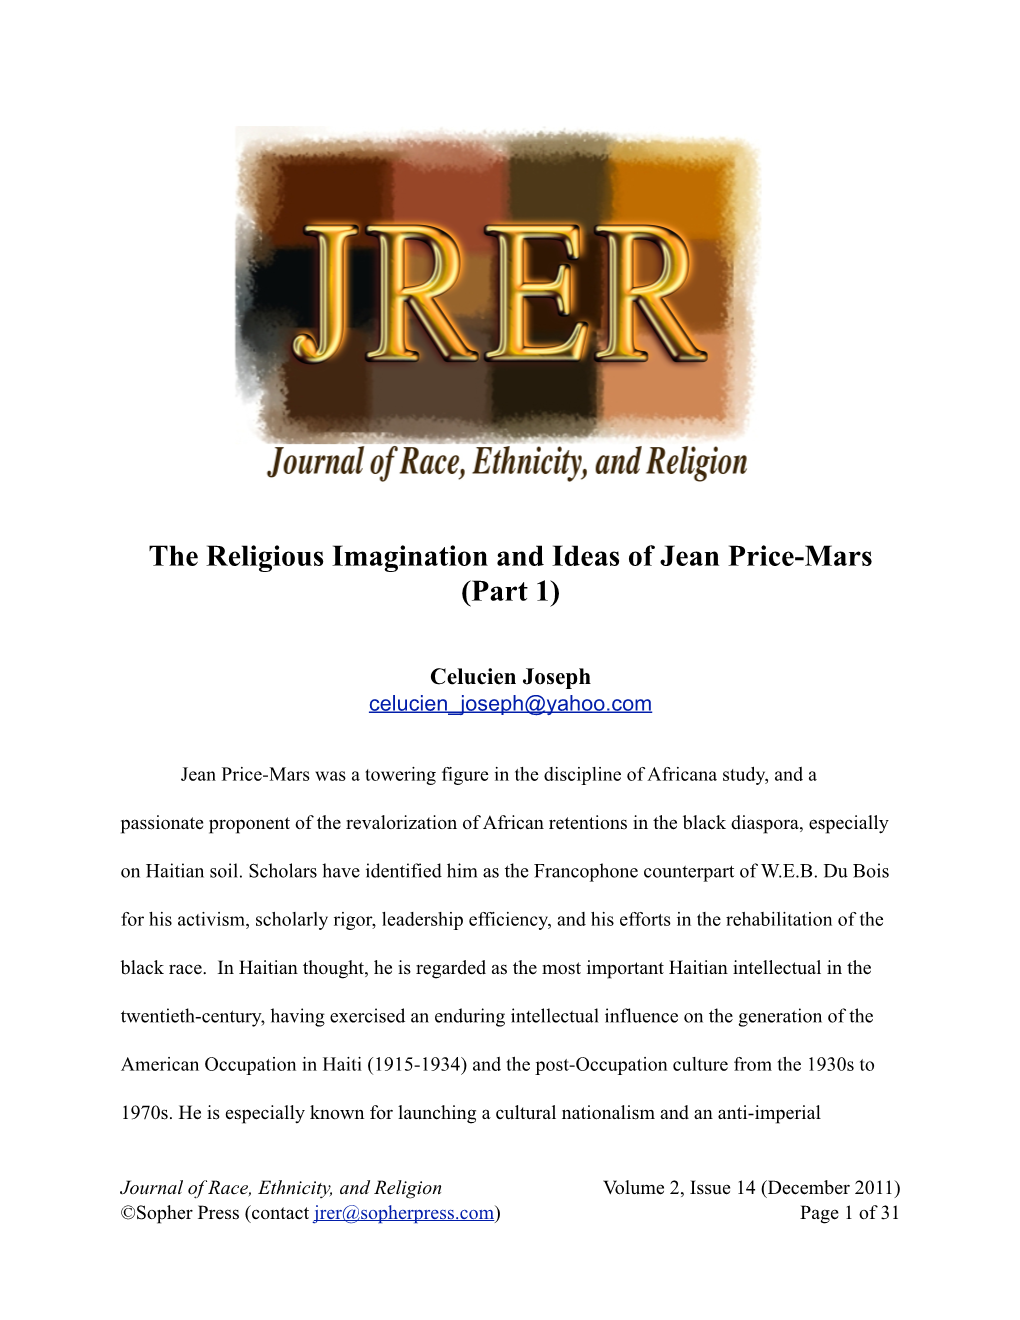 The Religious Imagination and Ideas of Jean Price-Mars (Part 1)